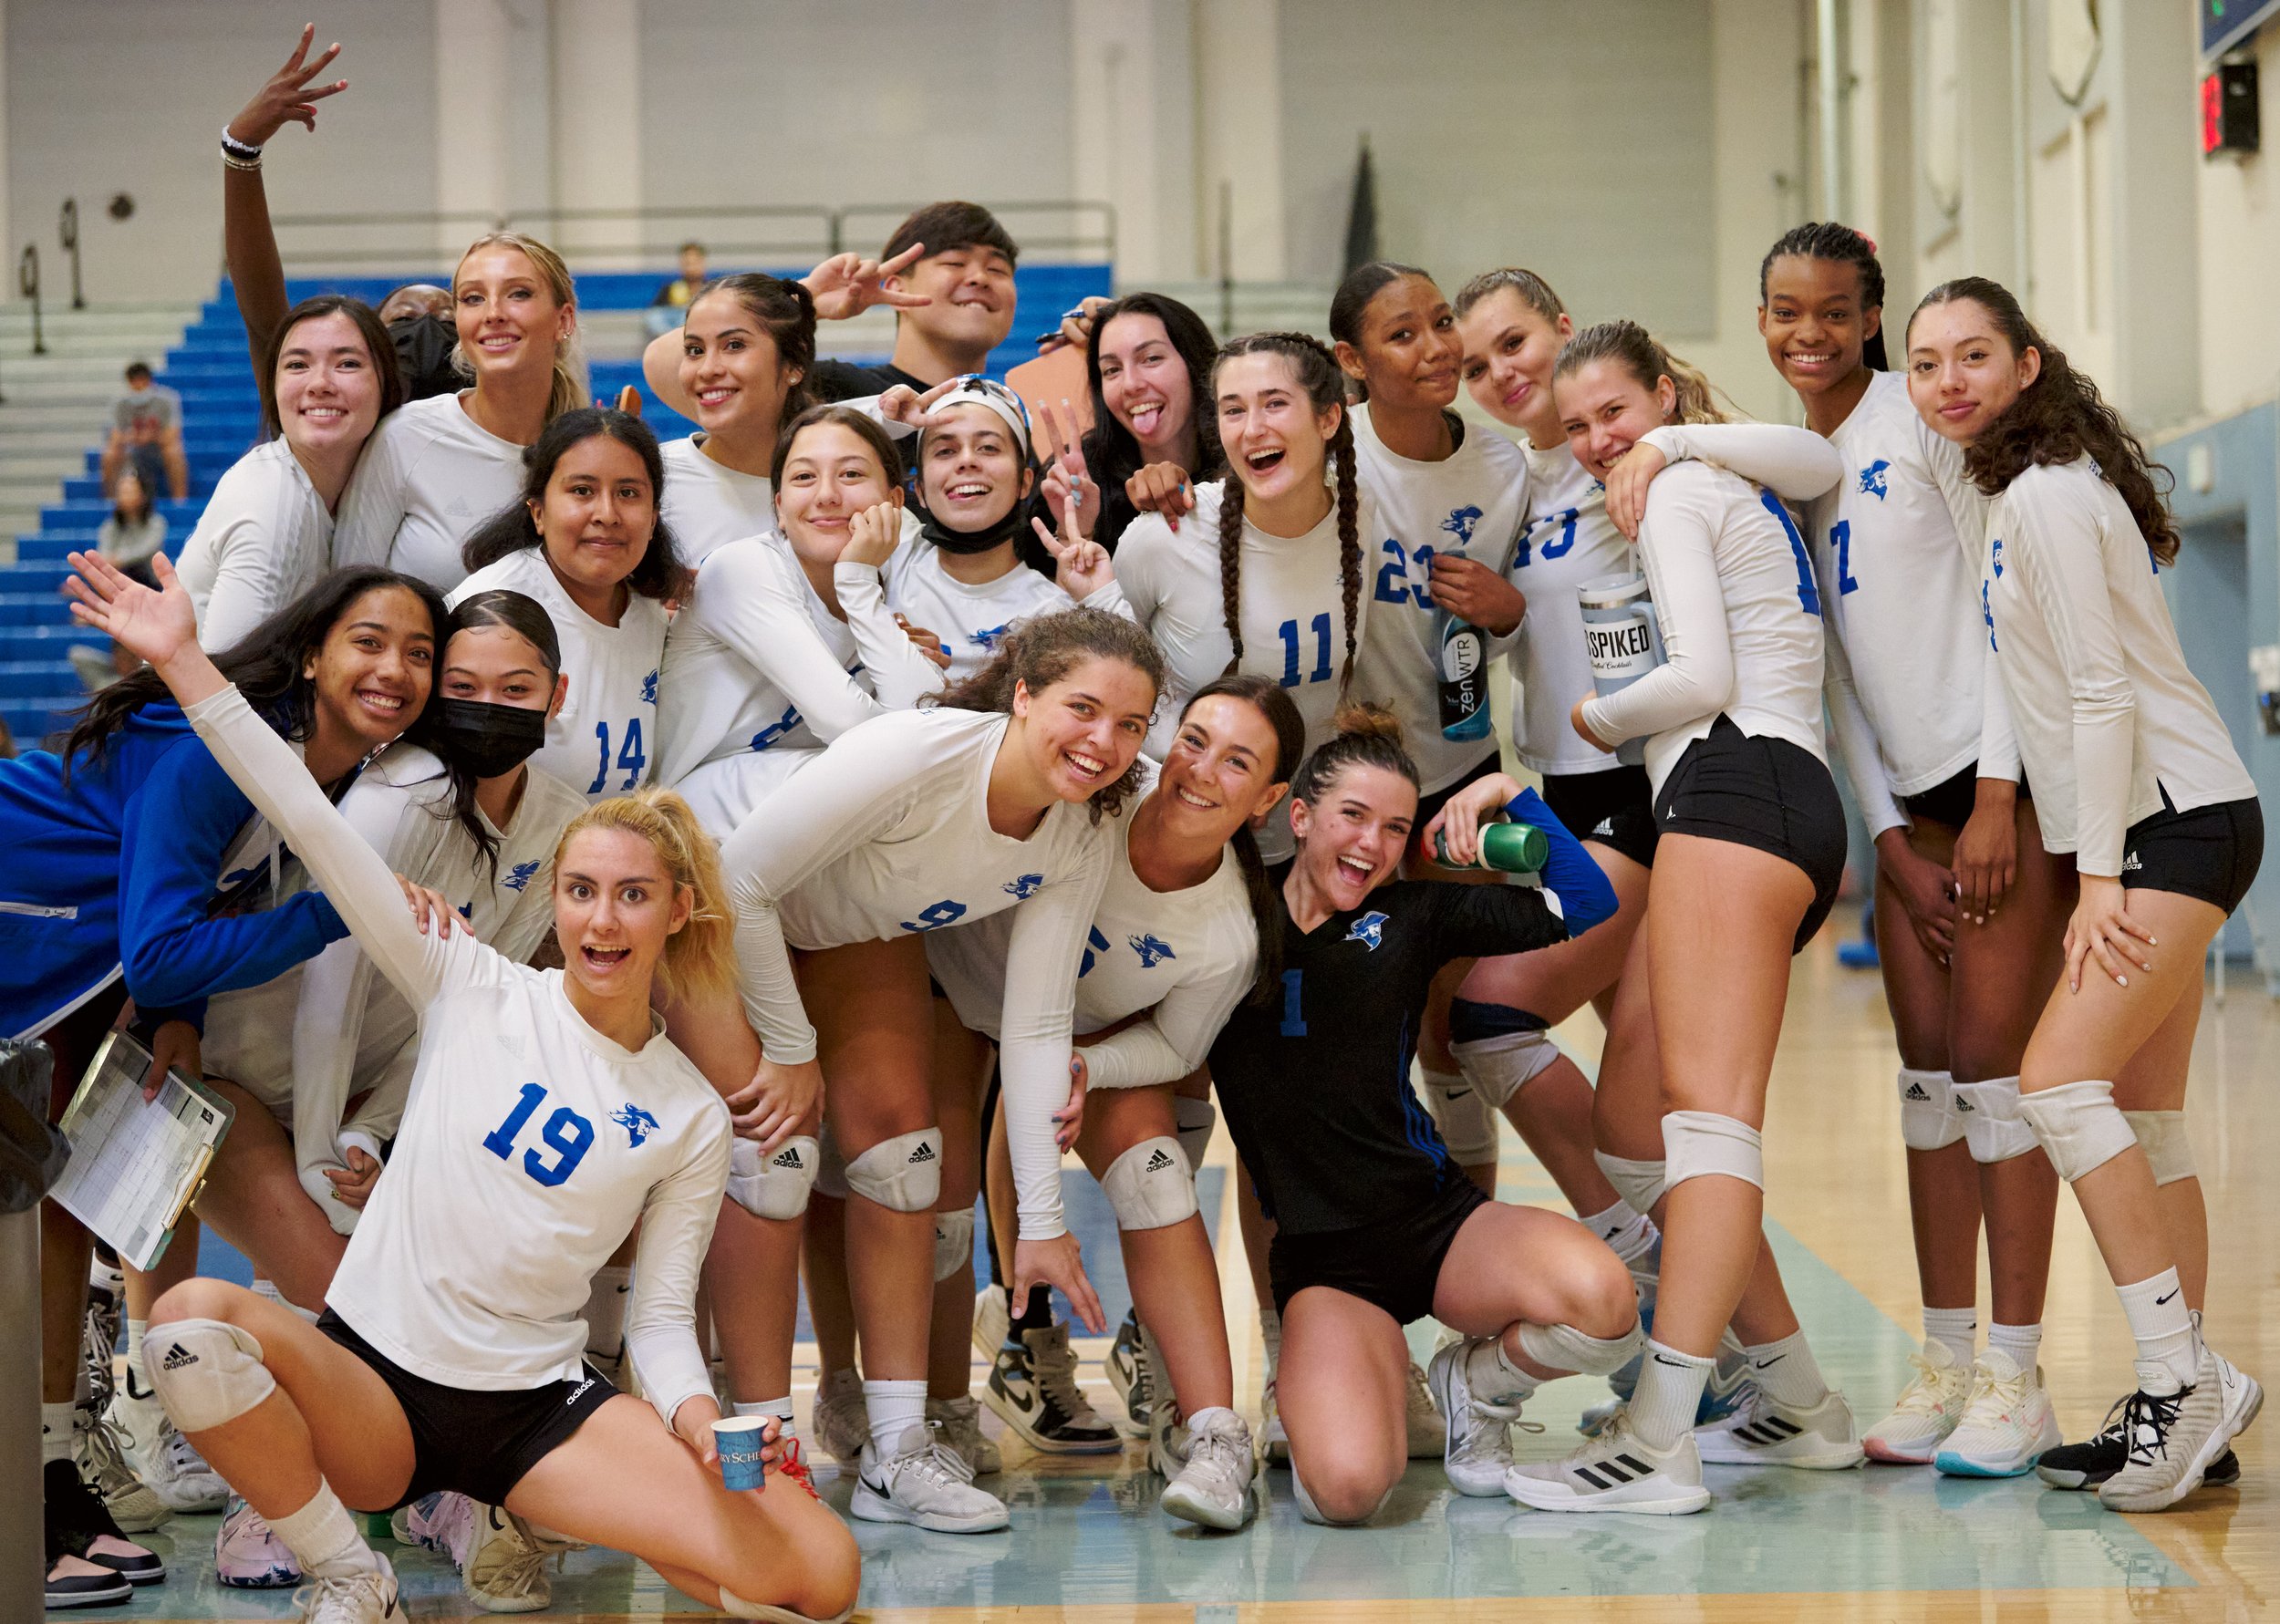  The Santa Monica College Corsairs' Women's Volleyball team pose for the camera during the match against the College of the Desert Roadrunners on Friday, October 7, 2022, at the Corsair Gym in Santa Monica, Calif. The Corsairs won 3-2. (Nicholas McCa